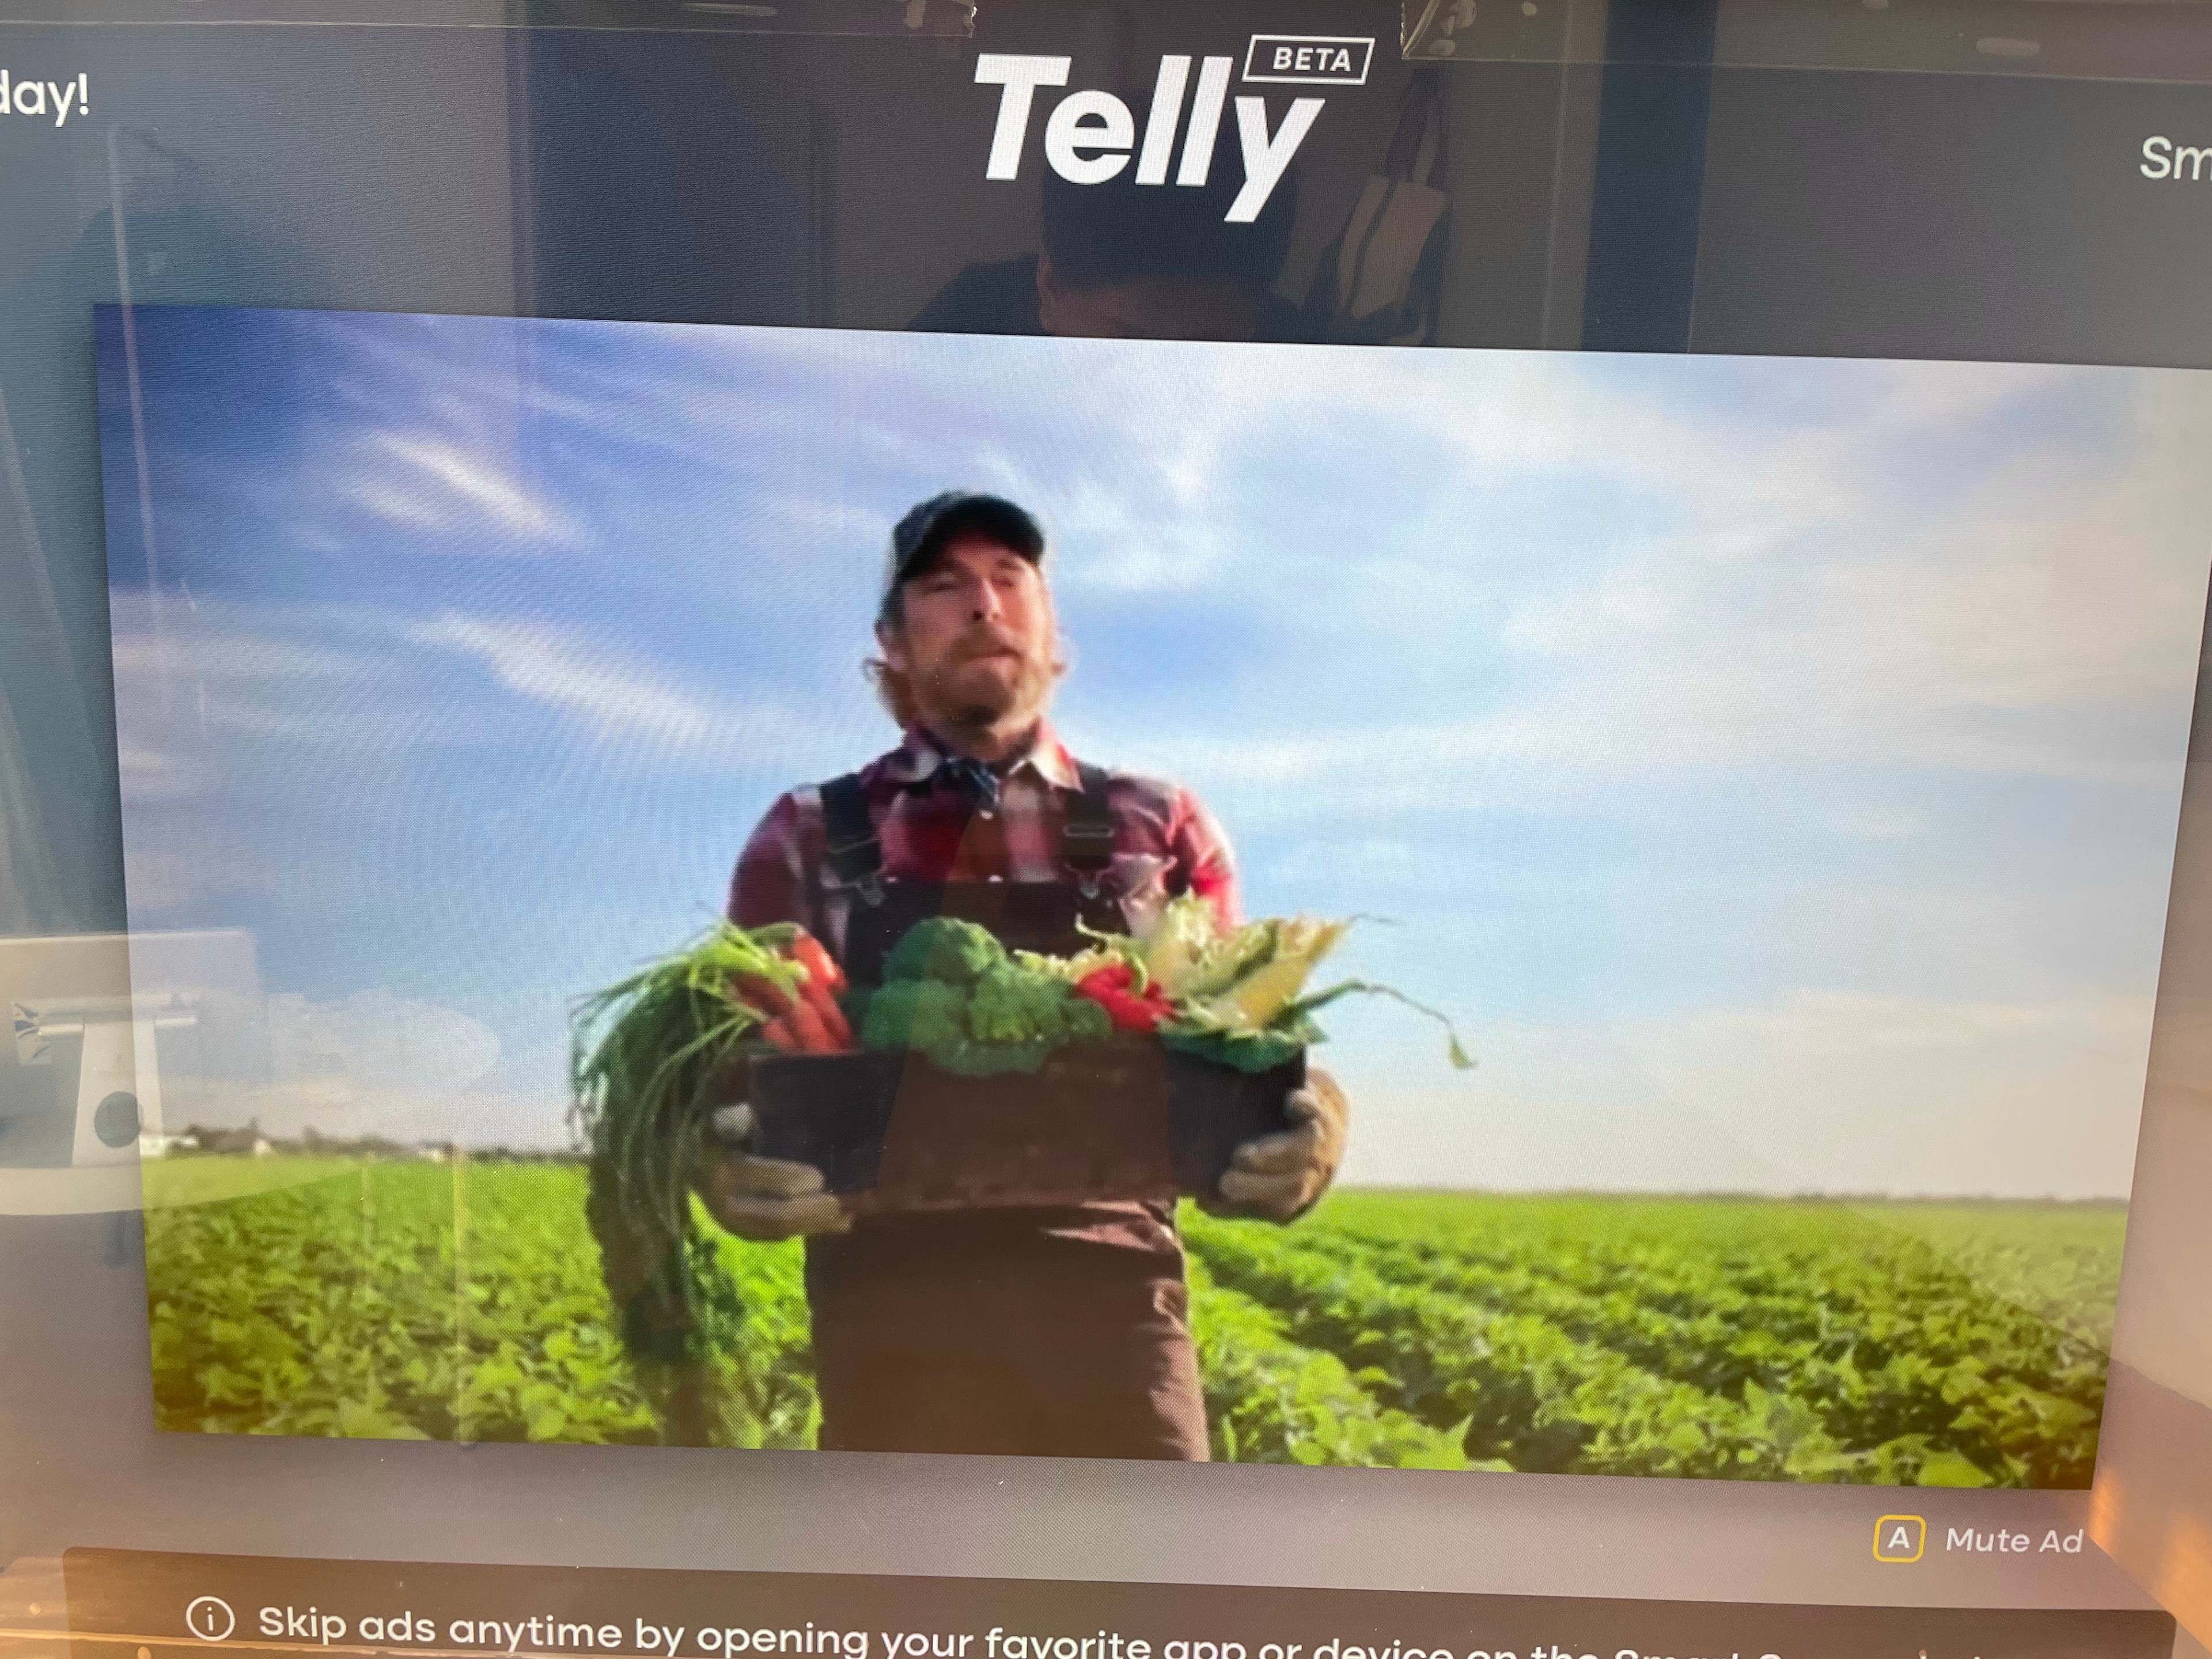 A photo of a Green Giant advertisement on a Telly TV. A man in overalls, a flannel and a cap is seen carrying a basket of vegetables